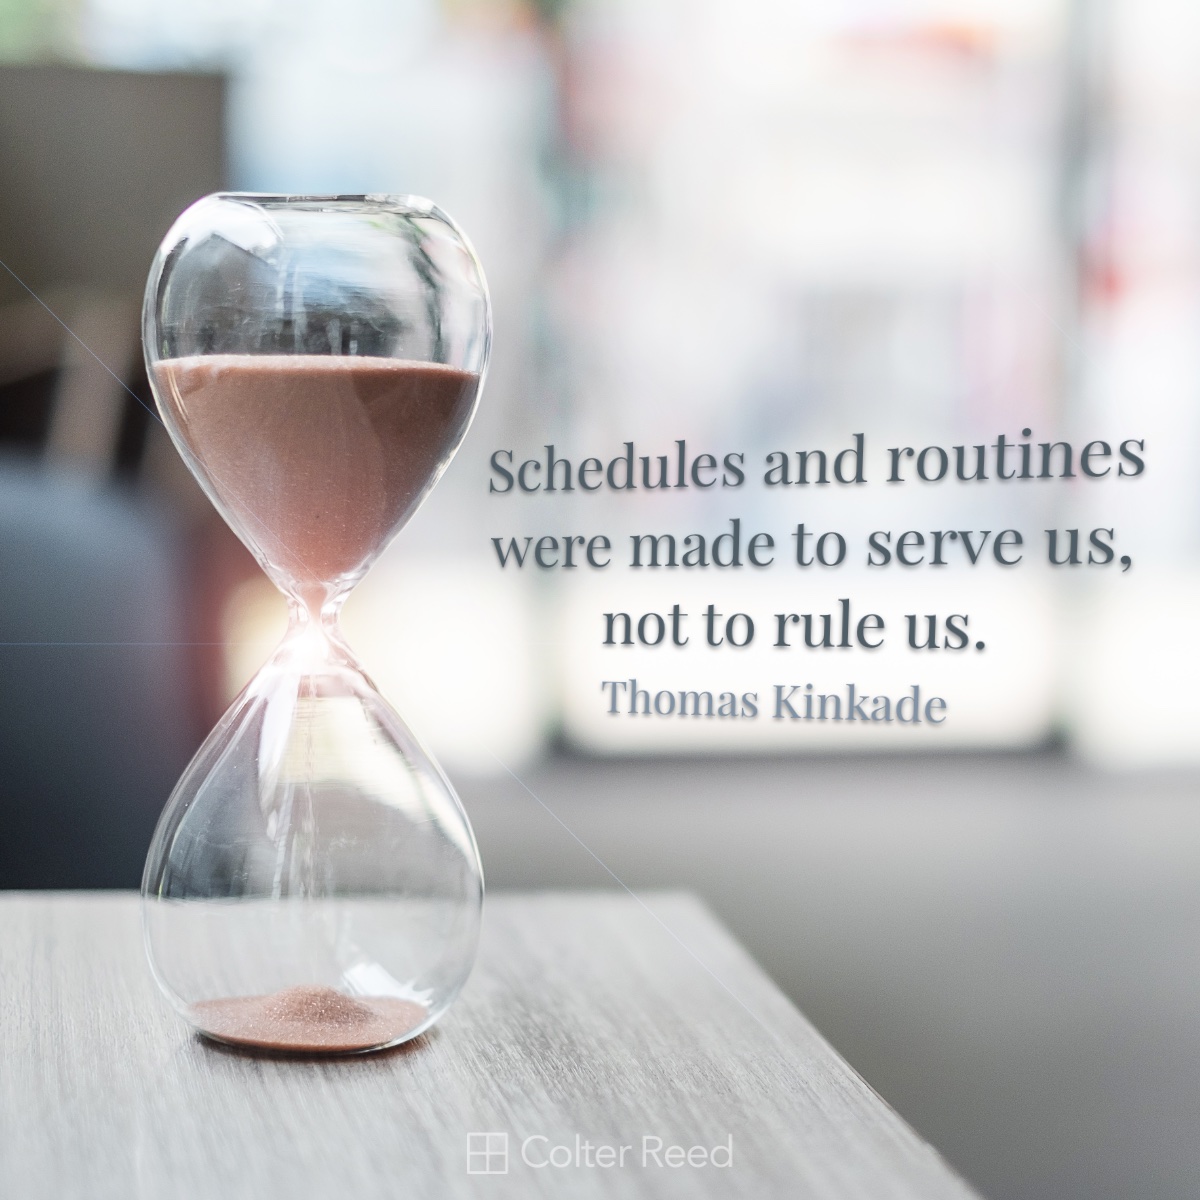 Schedules and routines were made to serve us, not to rule us. —Thomas Kinkade